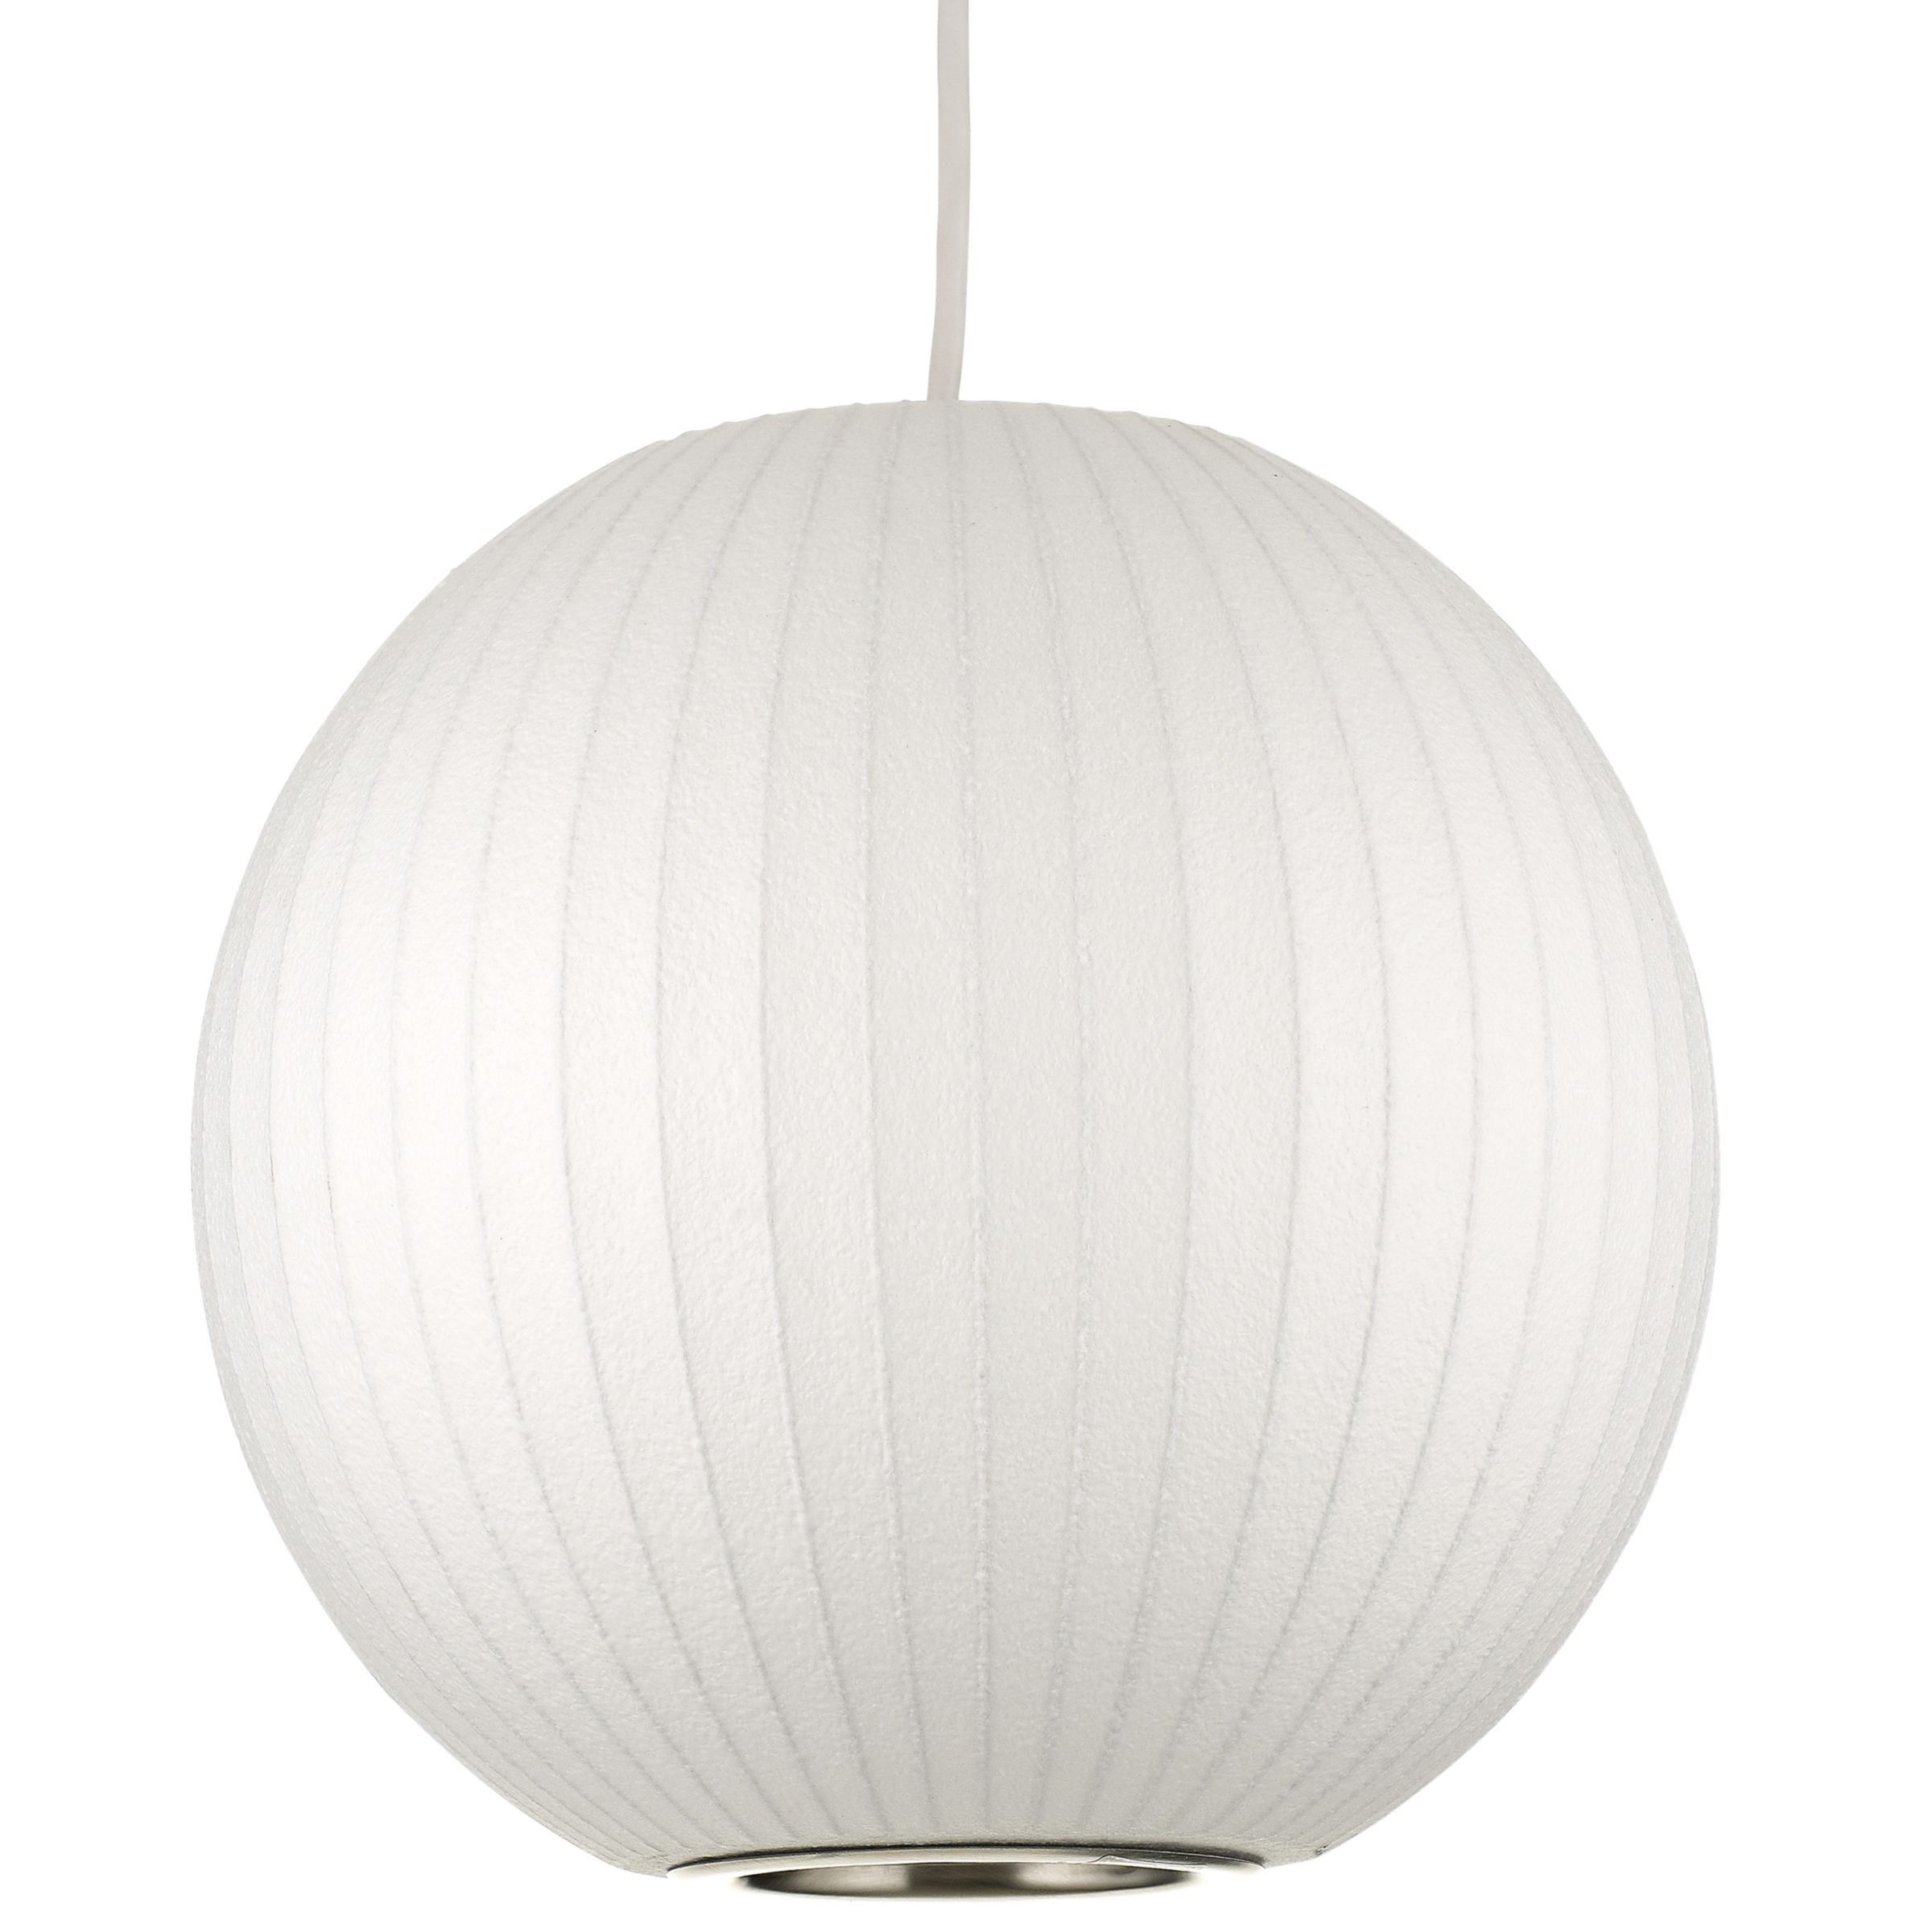 George Nelson Bubble Ceiling Light, Small